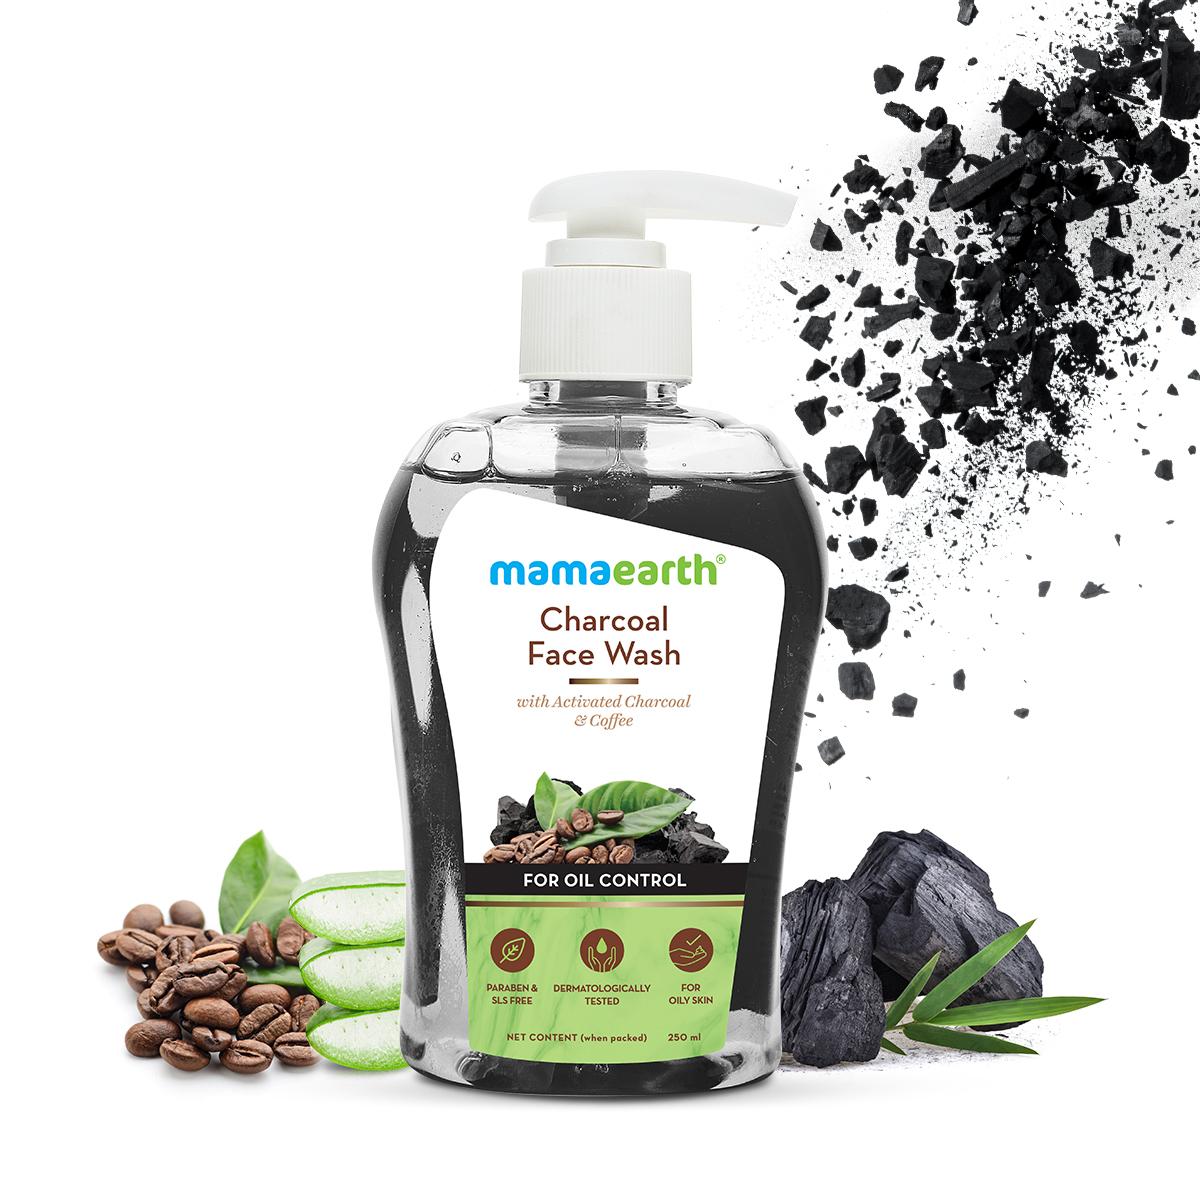 charcoal face wash with activated charcoal and coffee for oil control - 250ml